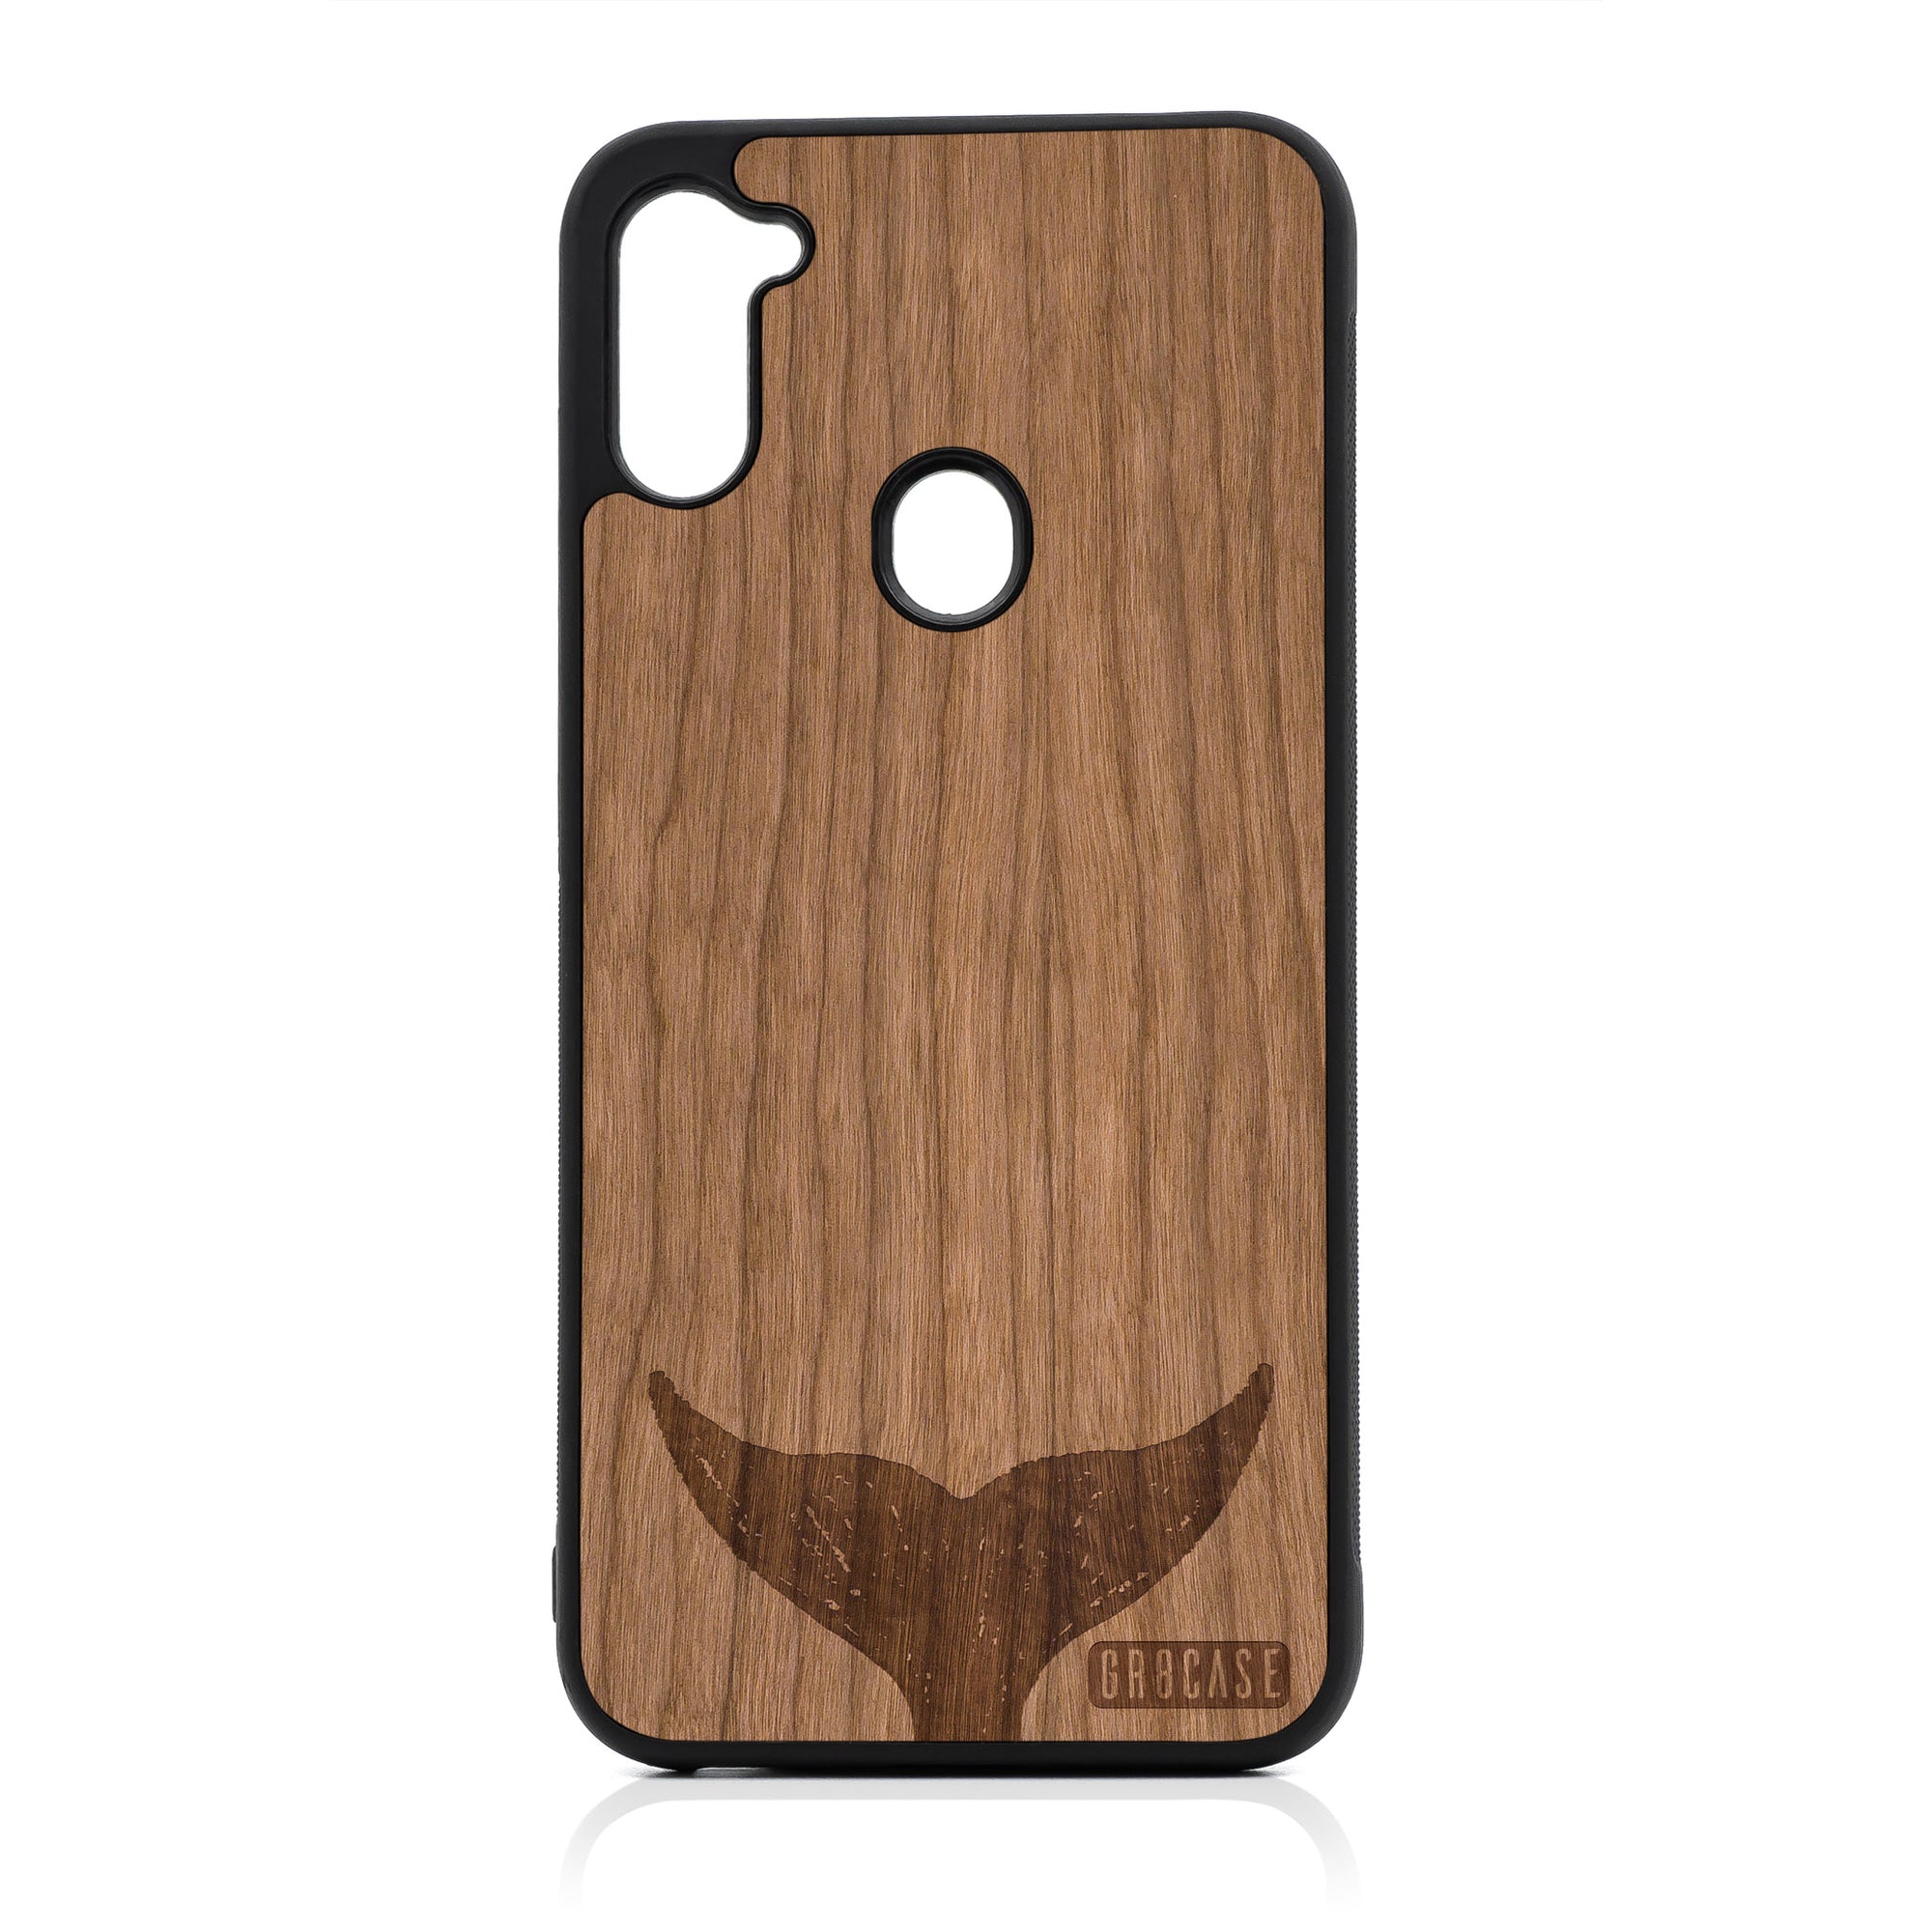 Whale Tail Design Wood Case For Samsung Galaxy A11